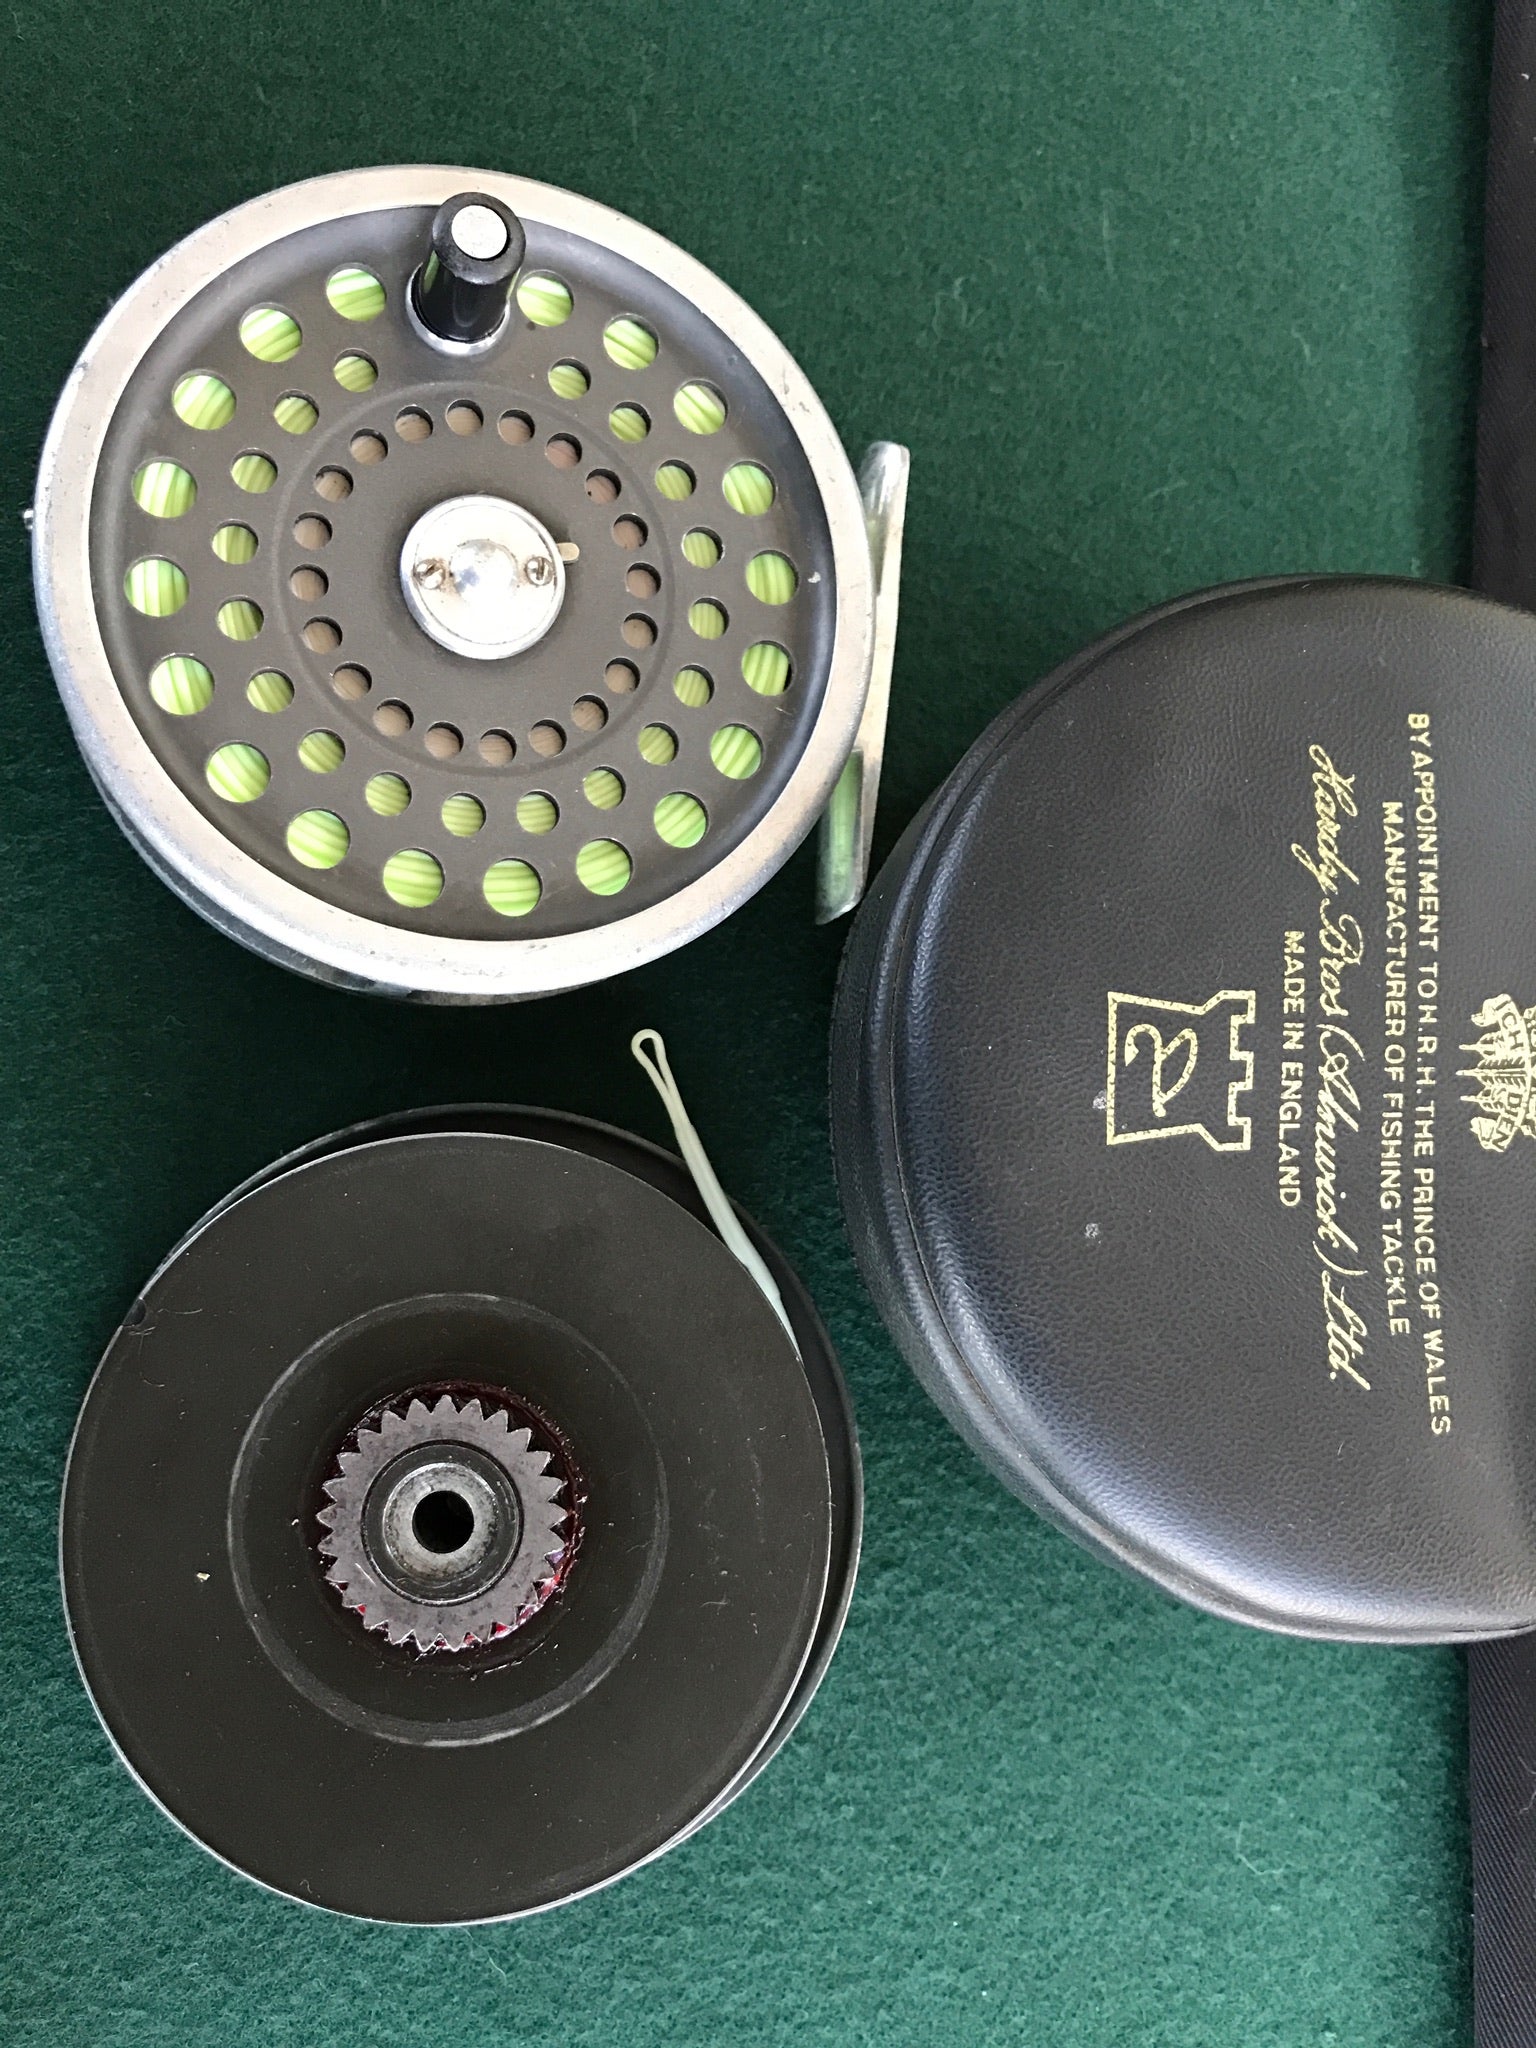 FS - Beulah Platinum 5wt Switch & Hardy Marquis 8/9 Reel